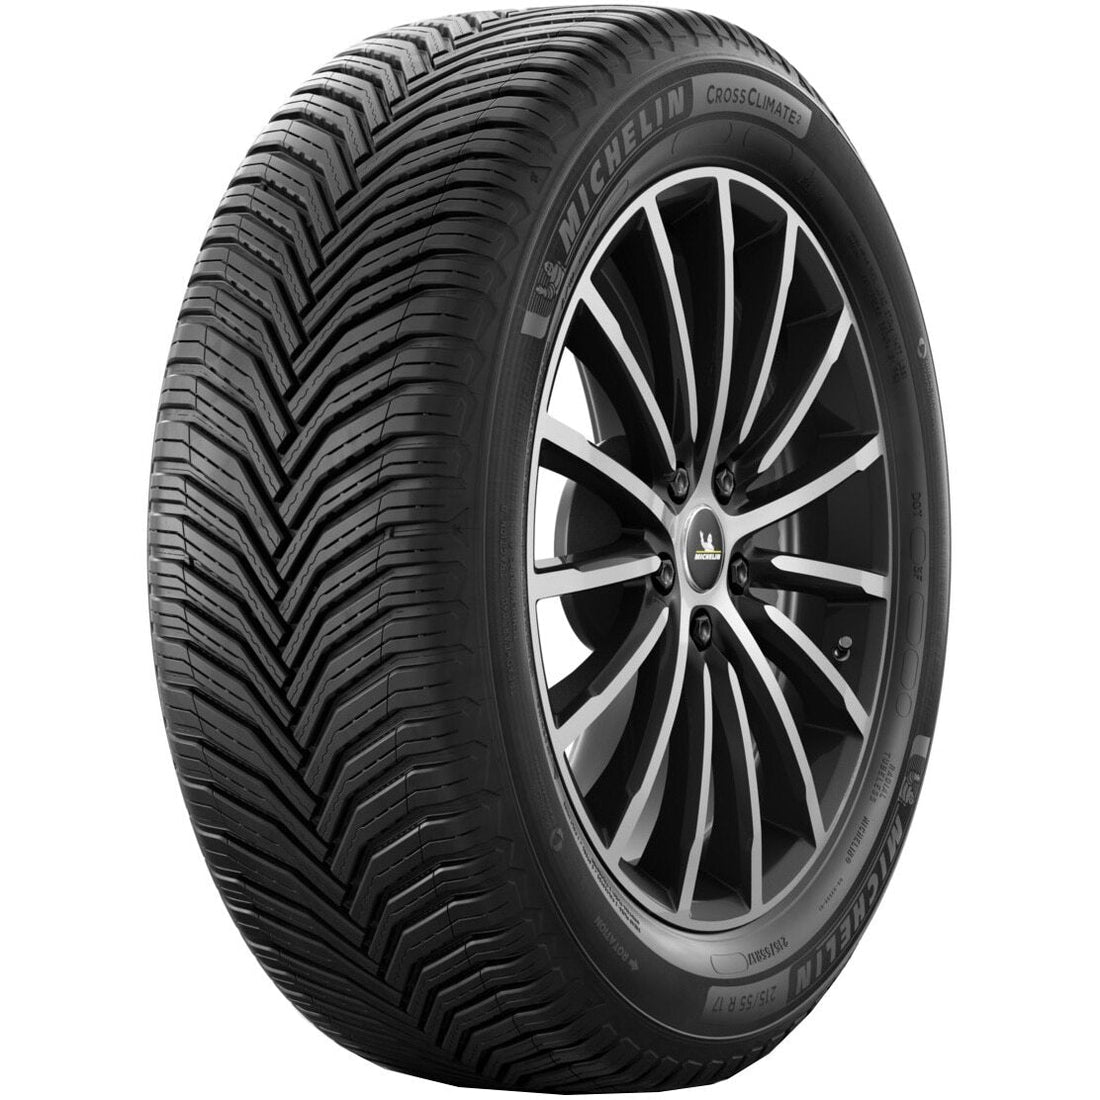 Anvelope All-season Michelin Crossclimate 2 235/50R18 101Y Anvelux